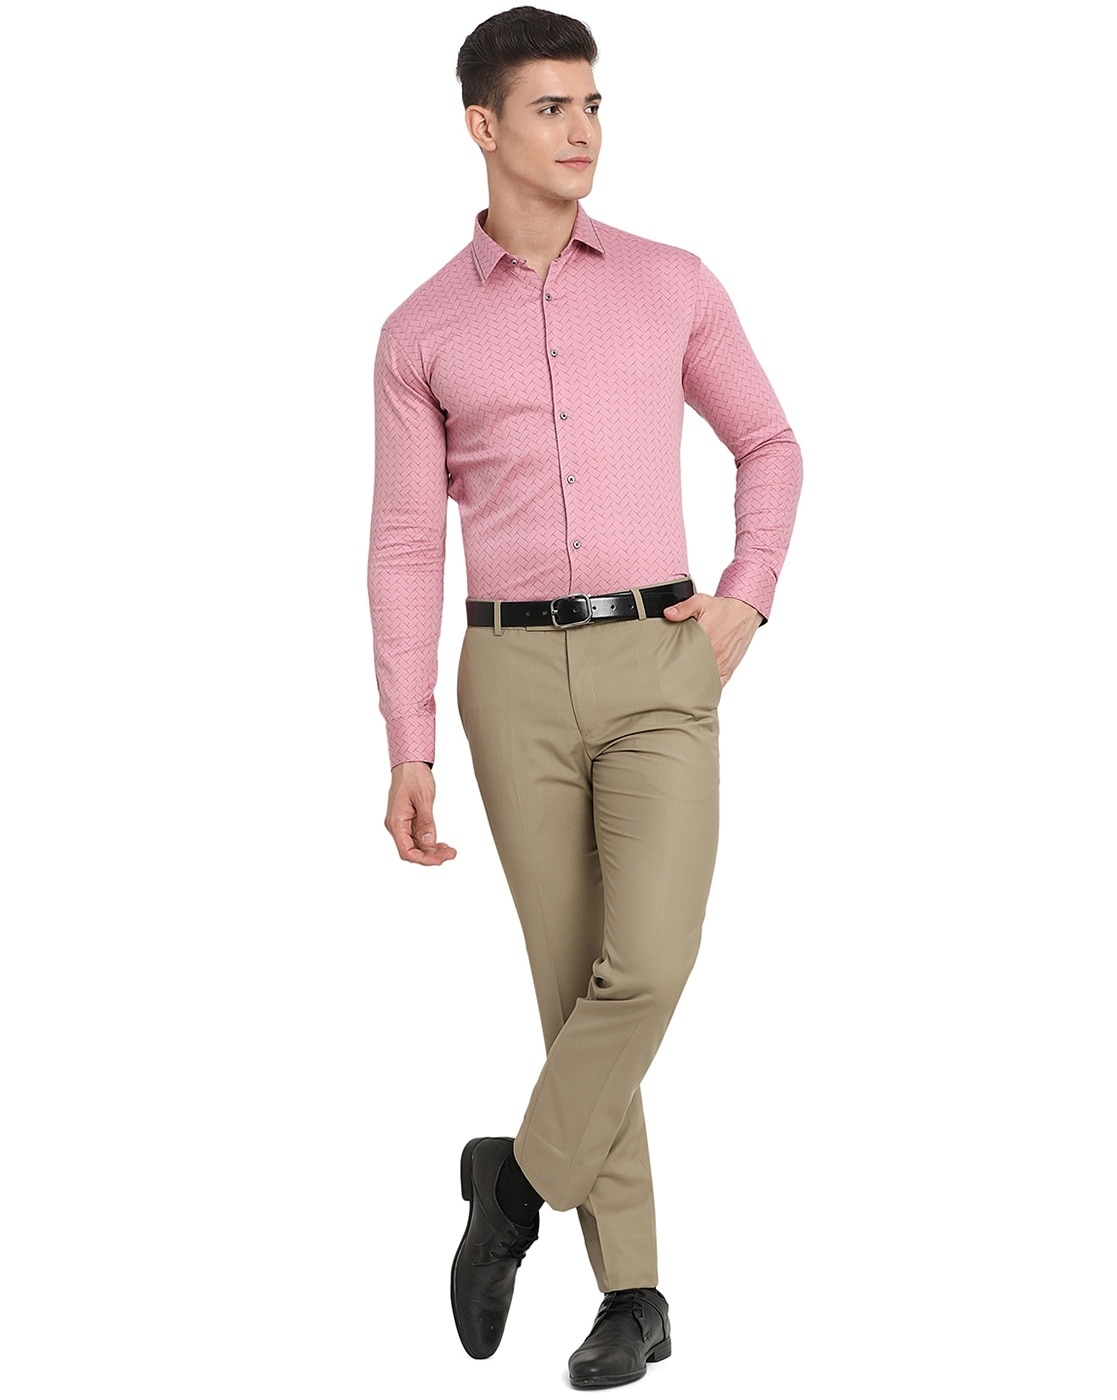 Gentleman's Gazette - How would you pull off wearing pink? | Facebook